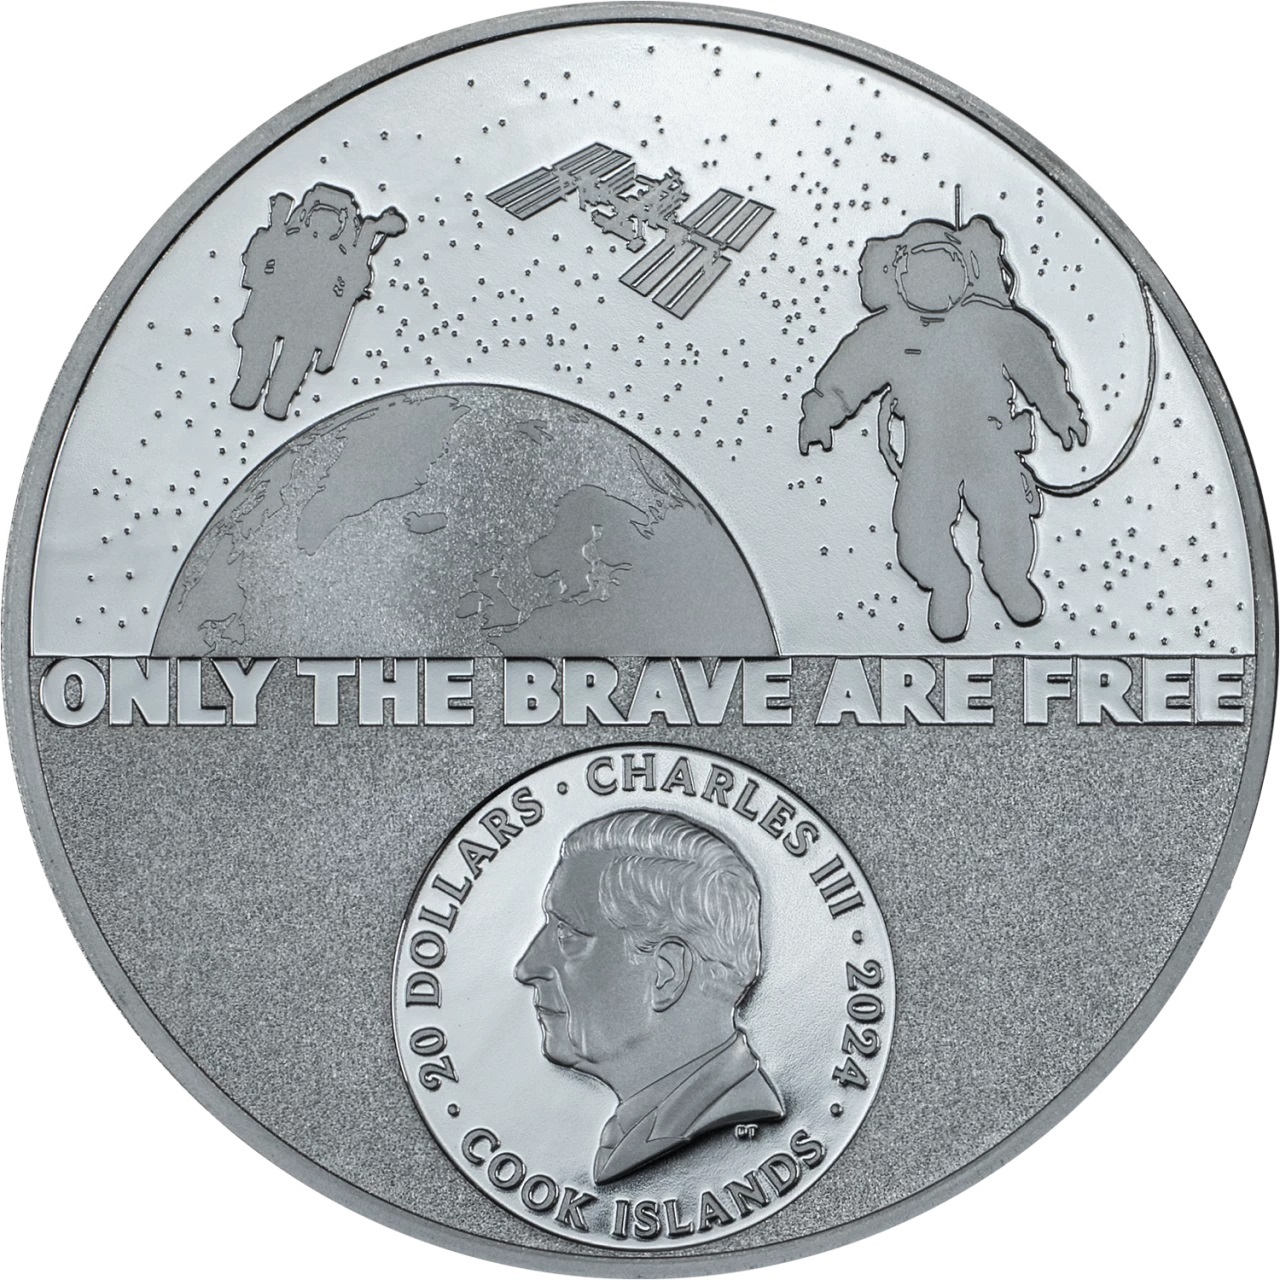 (W099.20.D.2024.30504) Cook Islands 20 Dollars Astronaut 2024 - Proof silver Obverse (zoom)